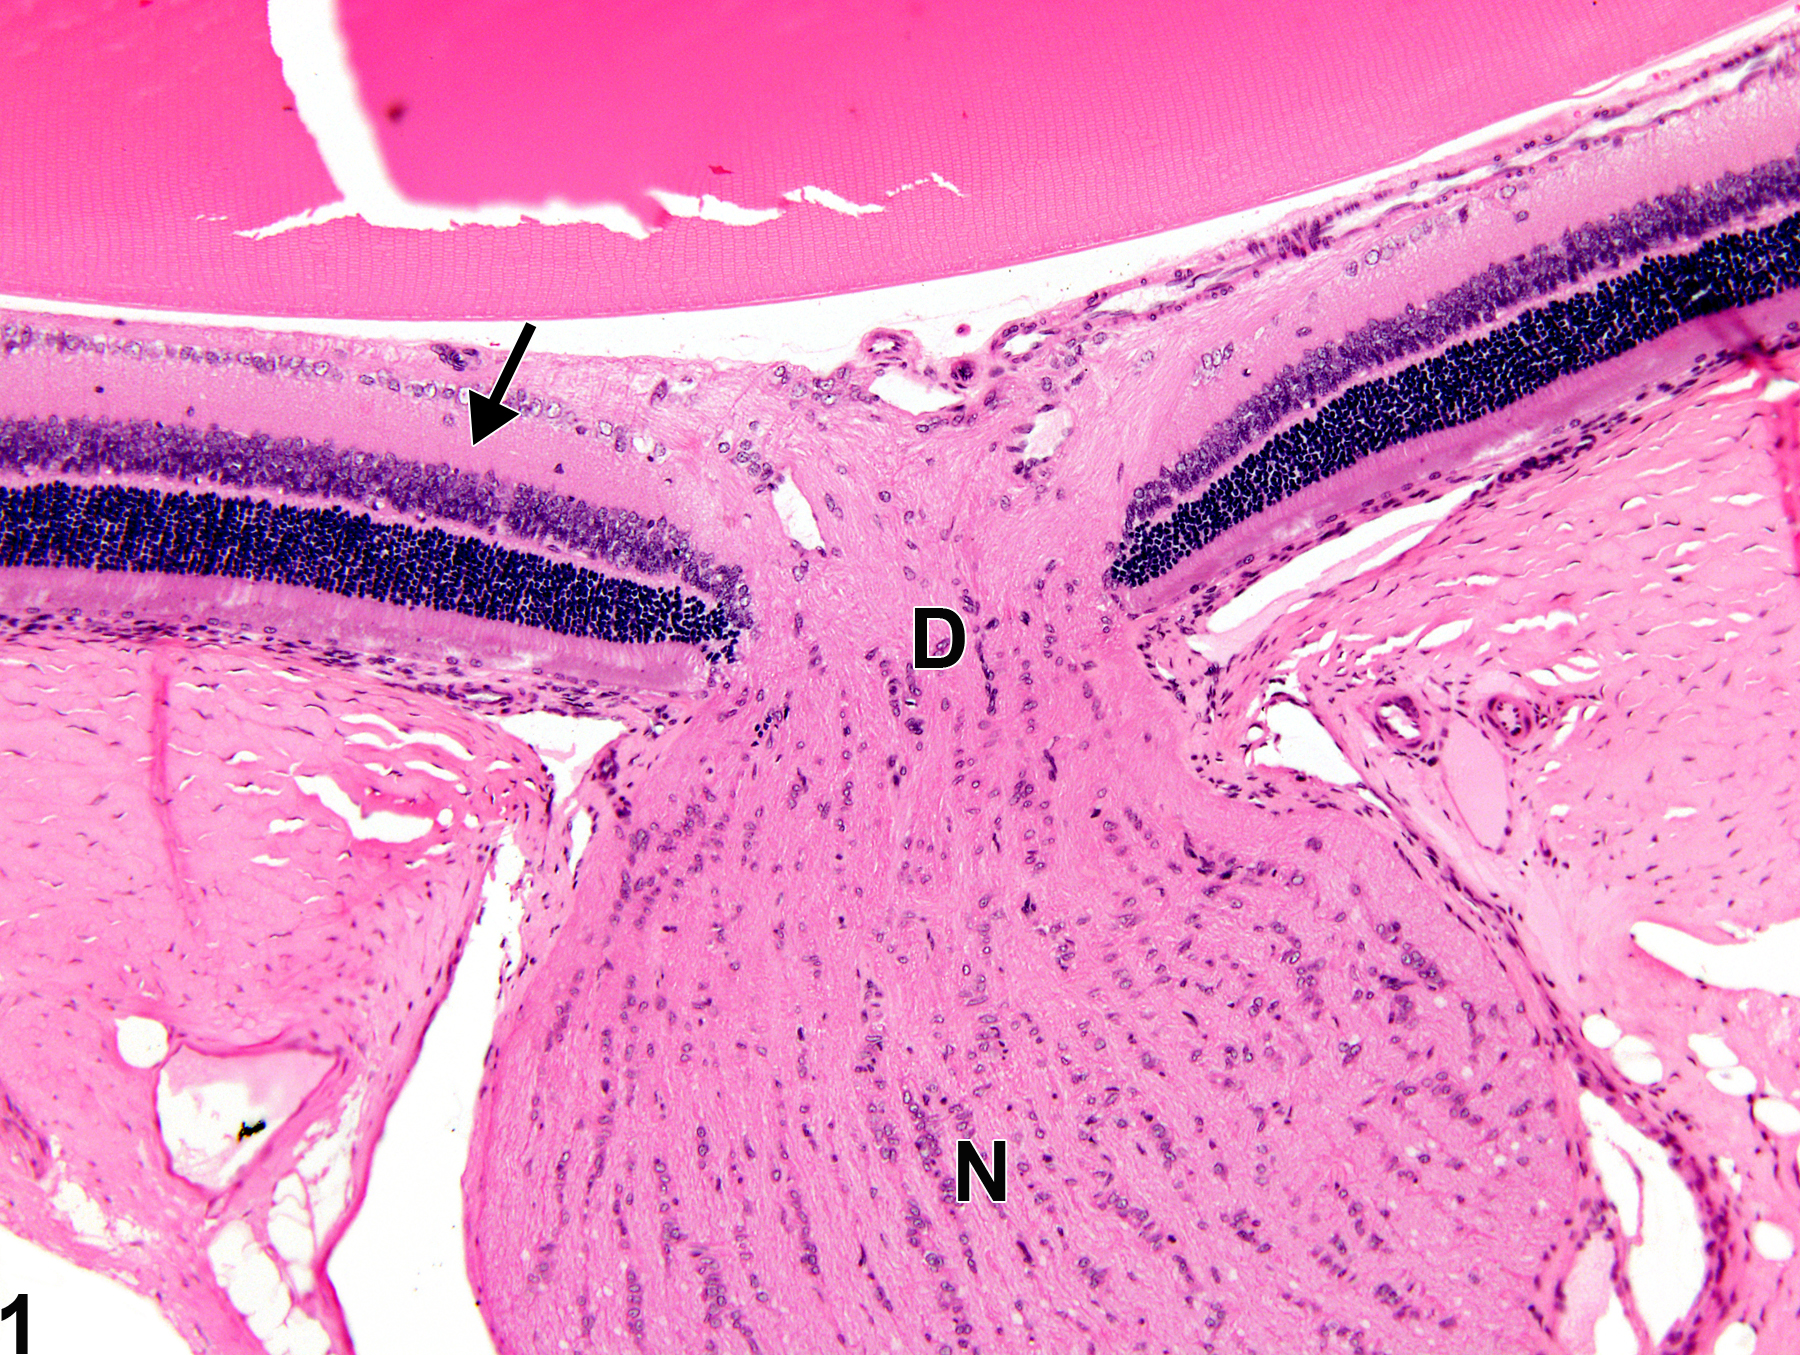 Image of retina gliosis in the eye from a female F344/N rat in a chronic study